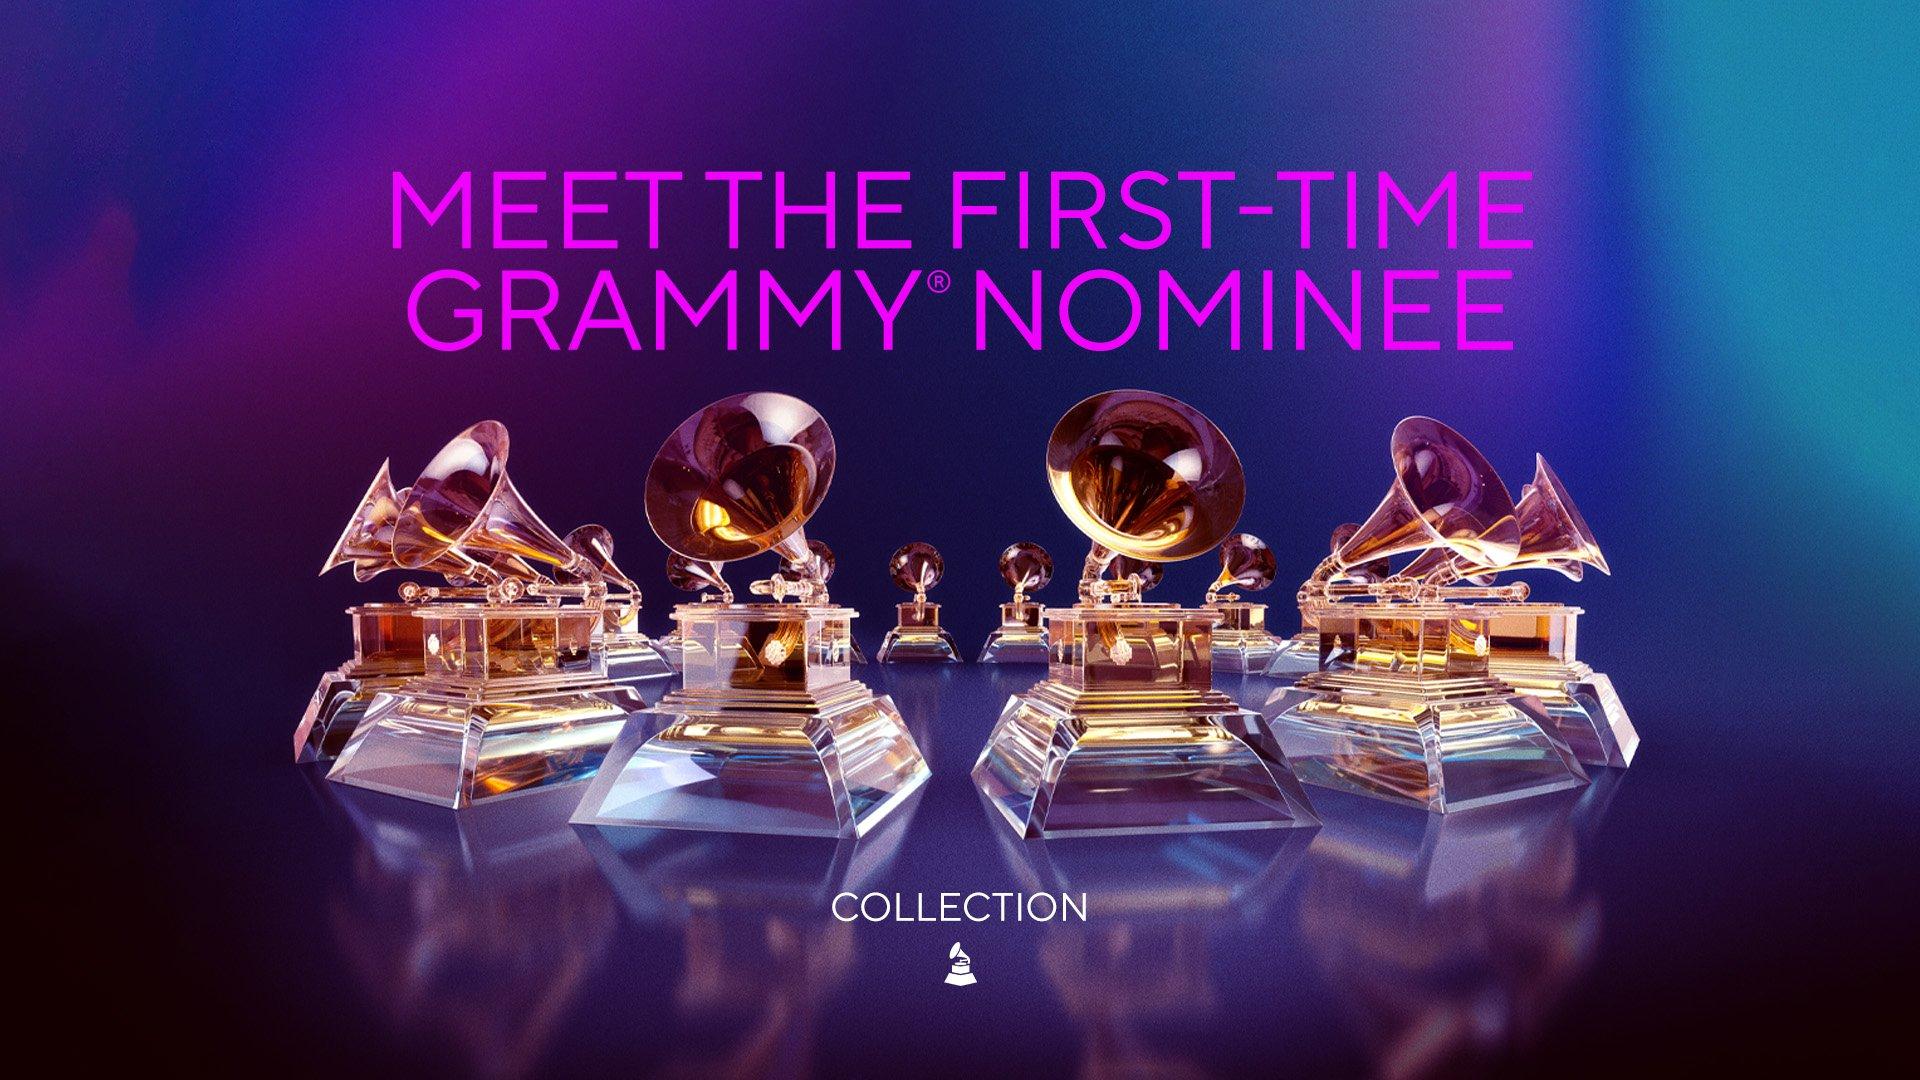 Meet The First-Time GRAMMY Nominee, an annual series on GRAMMY.com, introduces music-lovers to the rising artists and legends nominated for their first-ever GRAMMY.